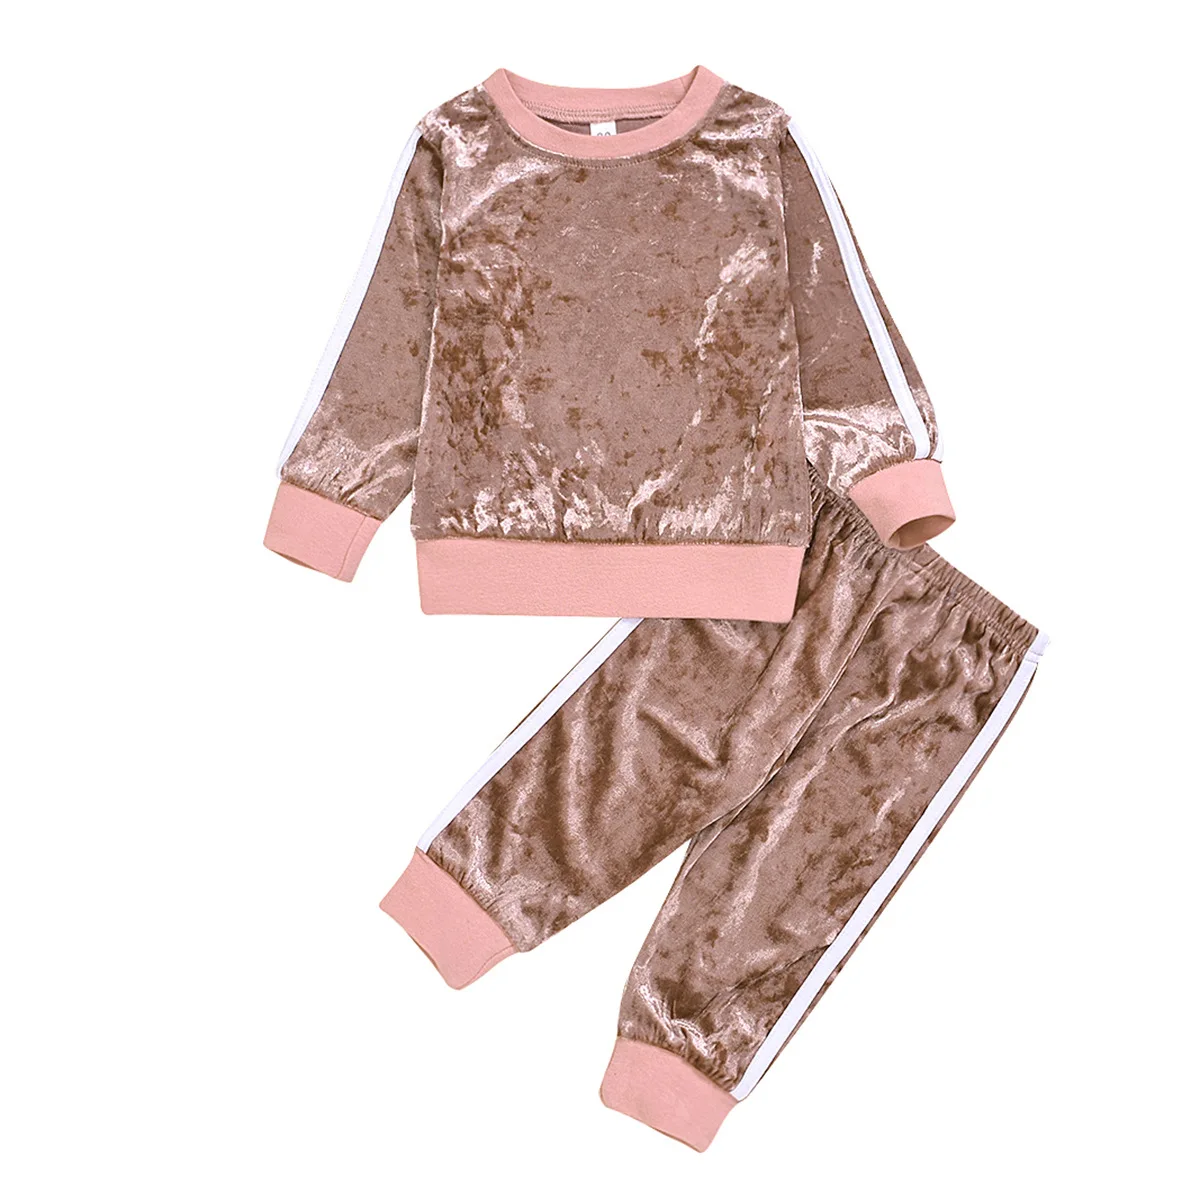 

2020 New spring Velvet Kids Baby Girls Clothes Sets Solid Long Sleeve T-shirt Tops + Pants 2PCS Outfit Sets 1-5T Dropshipping